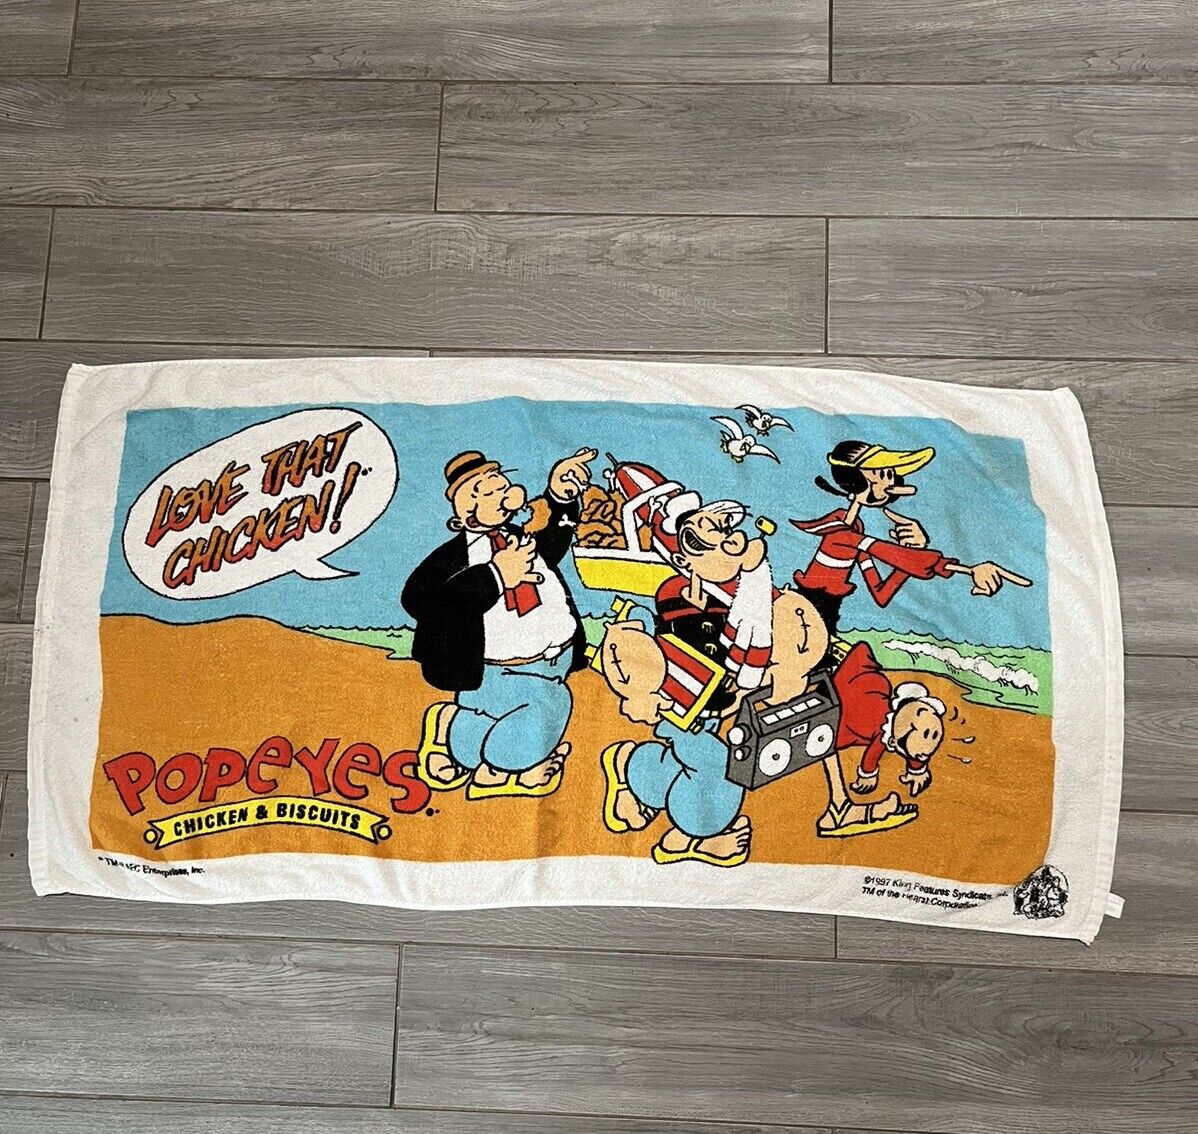 vtg popeye the sailor popeyes chicken and biscuits 1997 promo beach towel